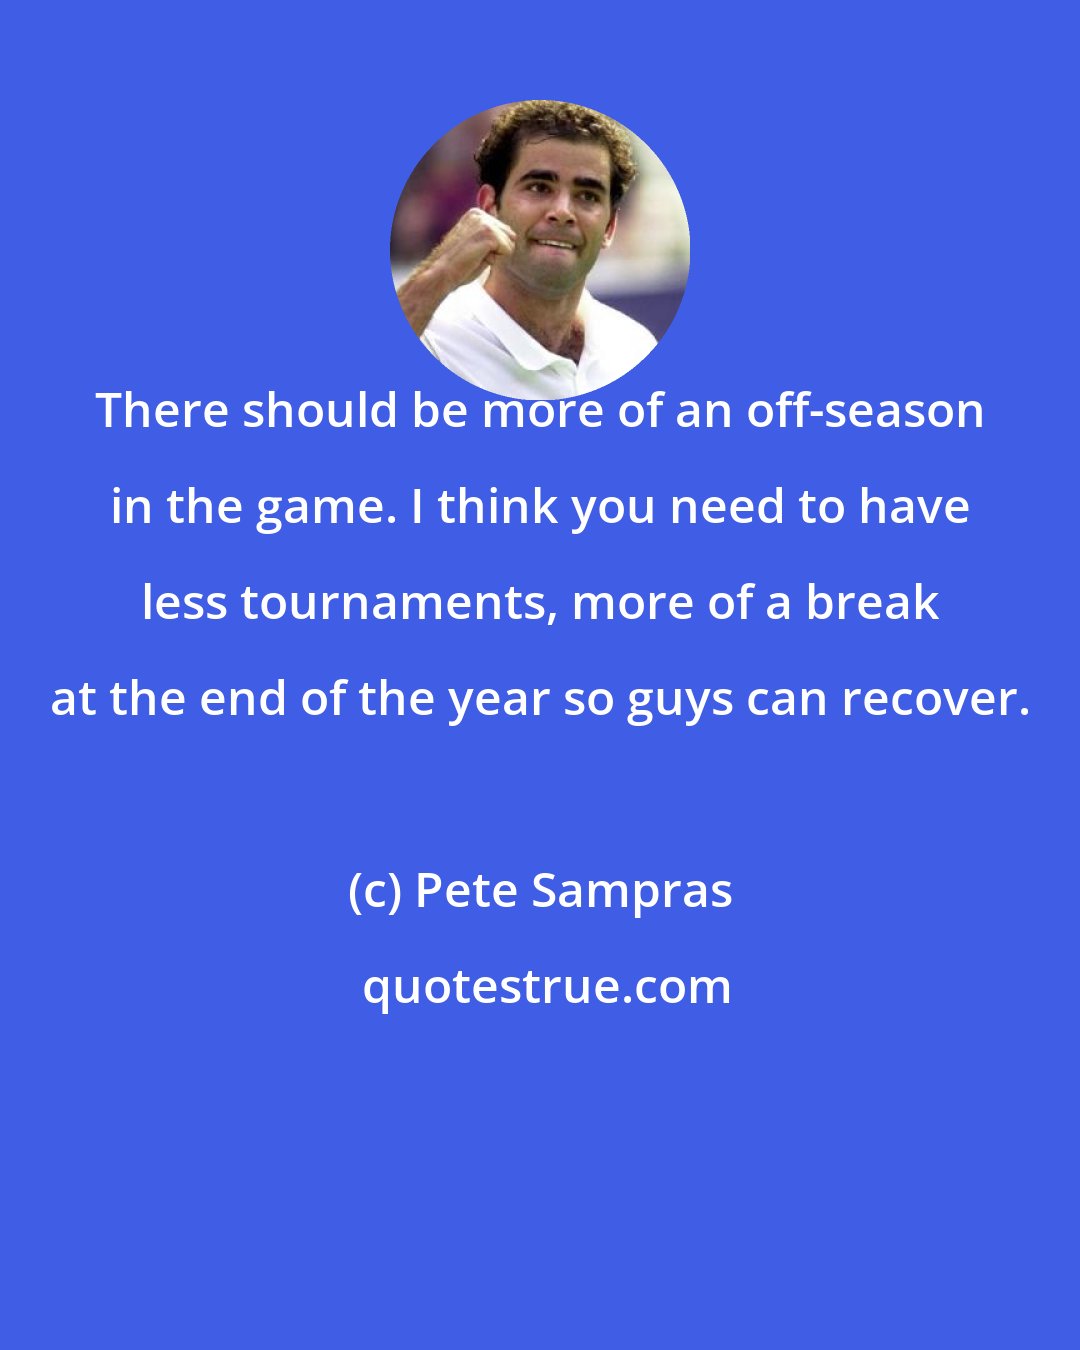 Pete Sampras: There should be more of an off-season in the game. I think you need to have less tournaments, more of a break at the end of the year so guys can recover.